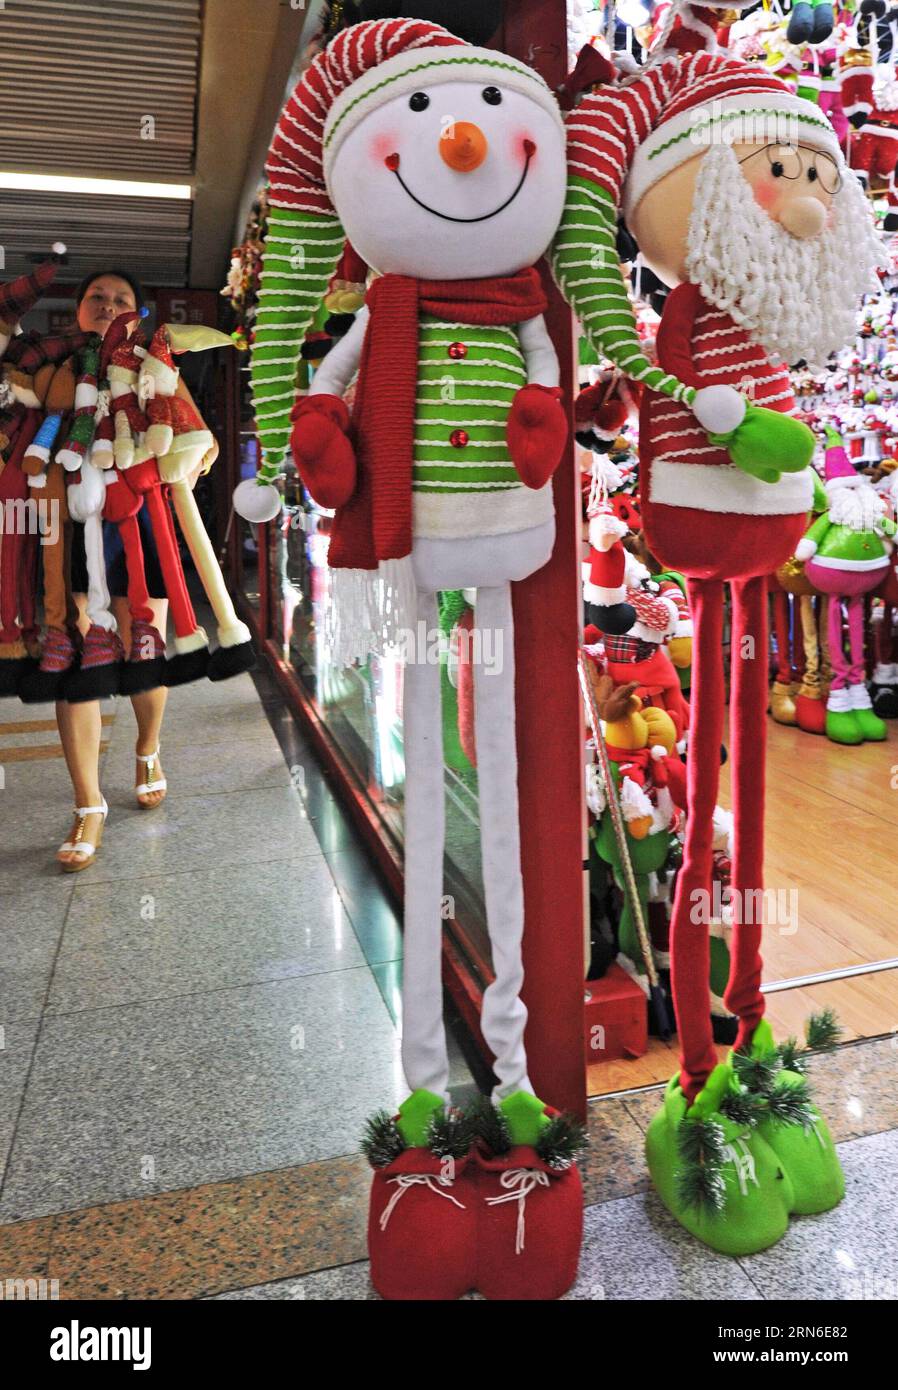 A businesswoman carries newly designed extensible Santa Claus dolls at Yiwu International Trading Mall, east China s Zhejiang Province, July 19, 2015. Known as the worldwide largest trading hub of Christmas commodity, Yiwu has come to its peak season of production and sale since July. ) (hgh/dhf) CHINA-ZHEJIANG-YIWU-CHRISTMAS COMMODITY-PEAK SEASON (CN) TanxJin PUBLICATIONxNOTxINxCHN   a Business Woman carries newly designed  Santa Claus Dolls AT Yiwu International Trading Mall East China S Zhejiang Province July 19 2015 known As The World Wide Largest Trading Hub of Christmas Commodity Yiwu ha Stock Photo